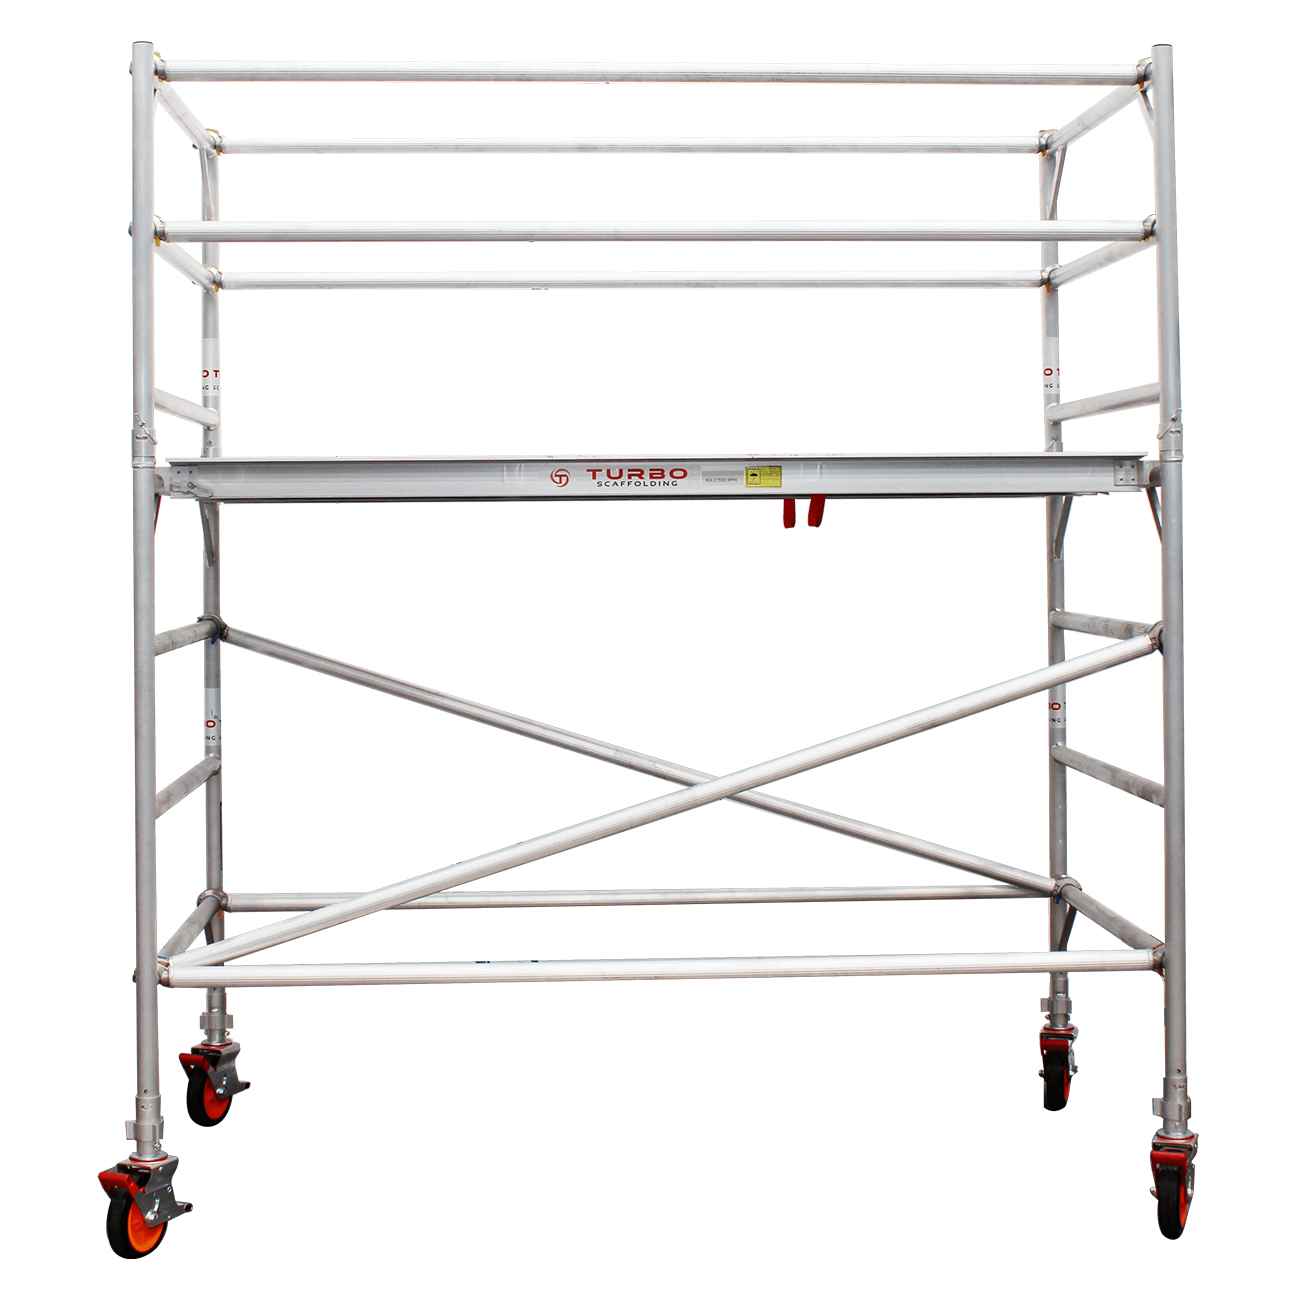 1.9m – 2.2m Wide Aluminium Mobile Scaffold Tower (Standing Height)